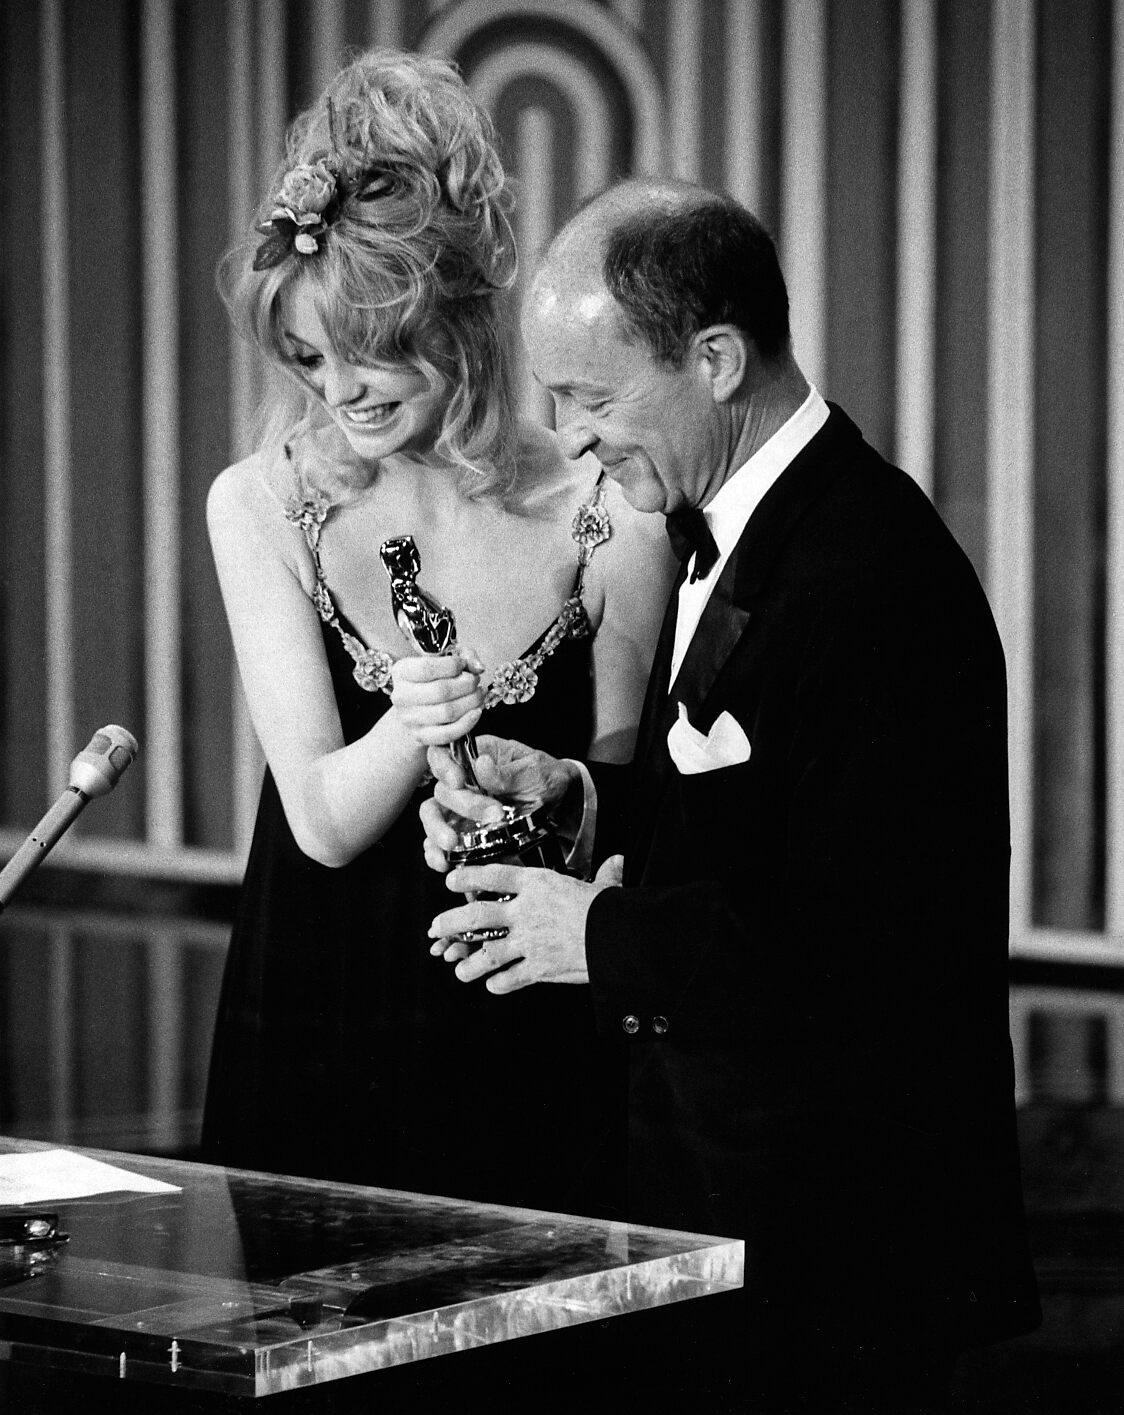 1971 | Oscars.org | Academy of Motion Picture Arts and Sciences1124 x 1415